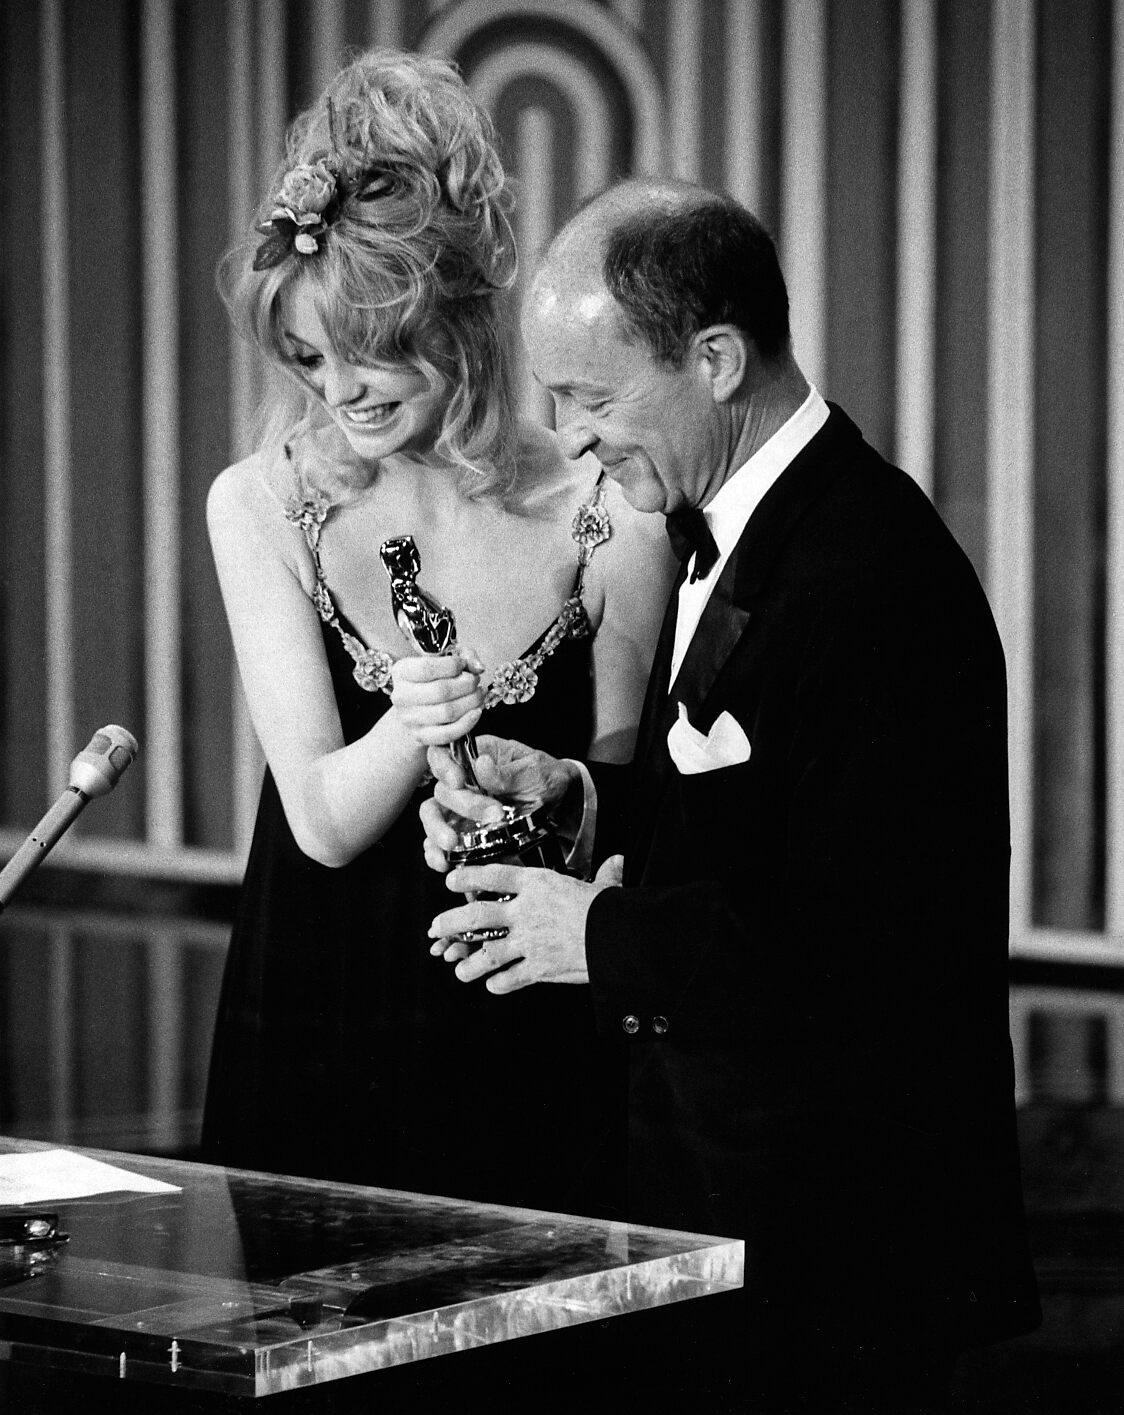 1971 | Oscars.org | Academy of Motion Picture Arts and Sciences1124 x 1415